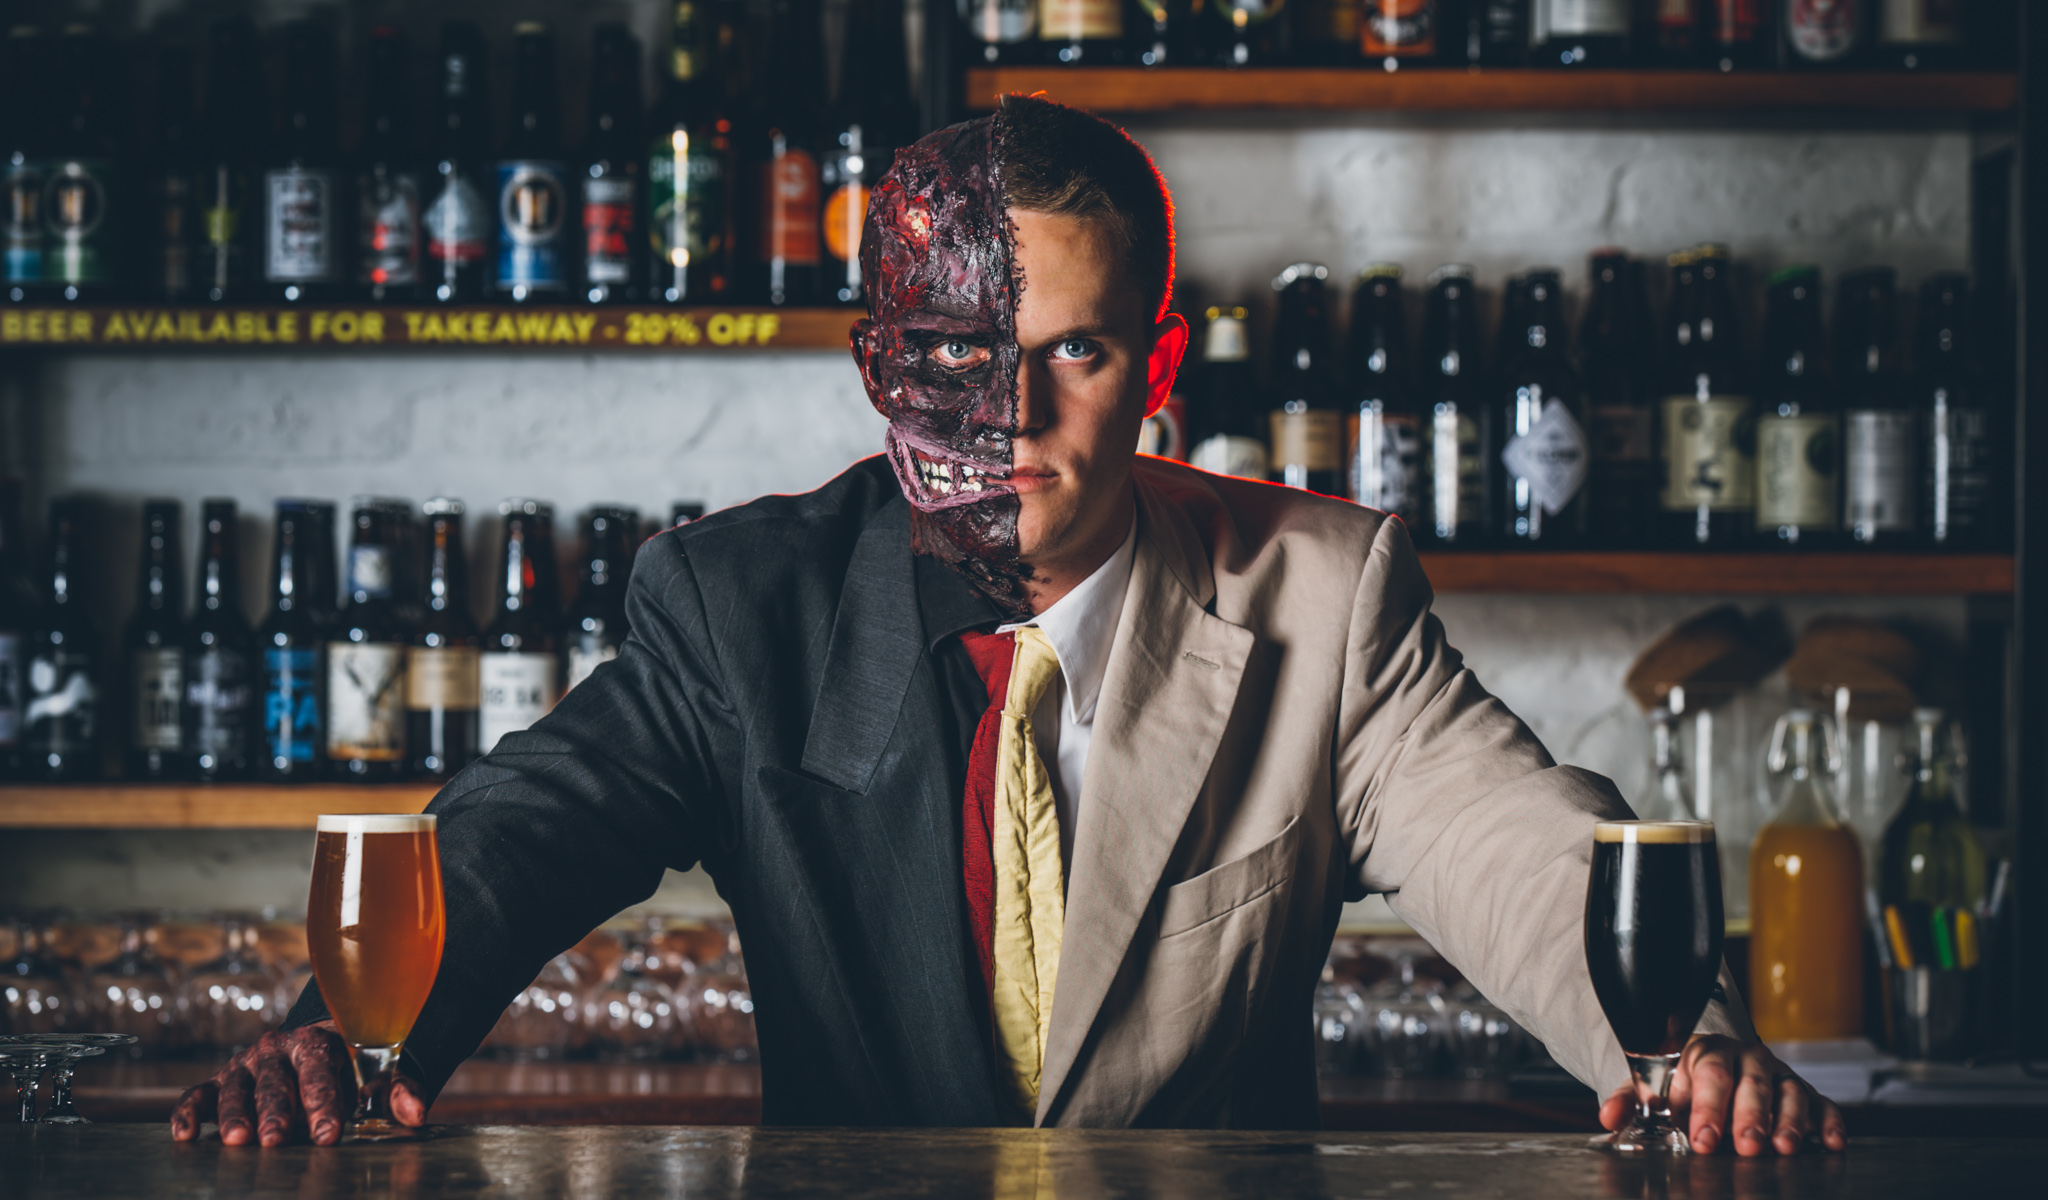 halloween bartender halloween costumes - Beer Available For Takeaway20%Off